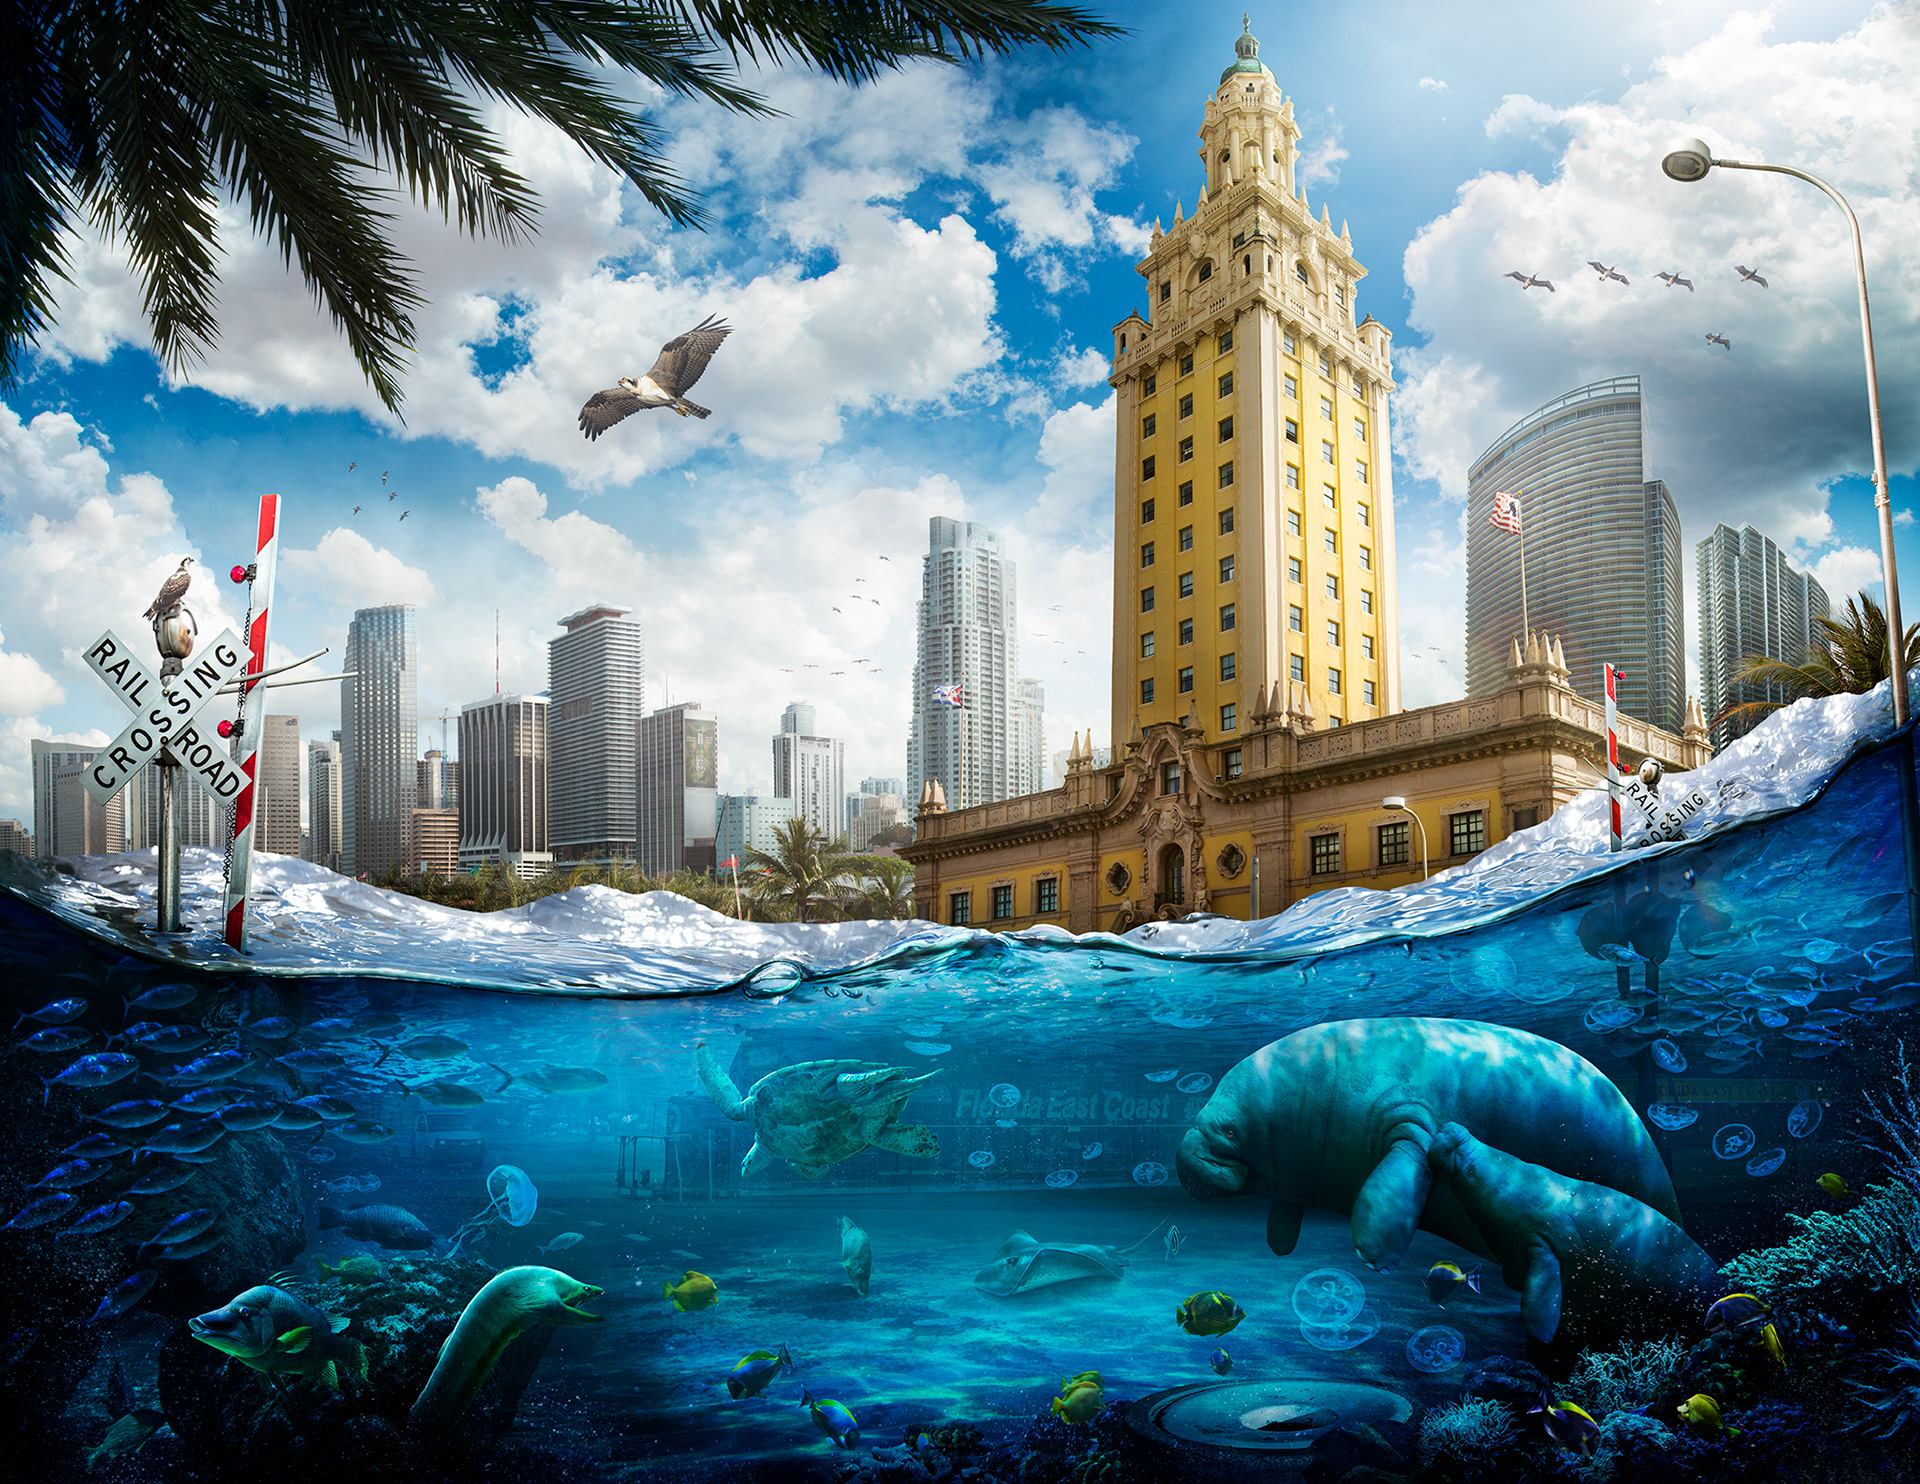 Floating World, a Photoshop project on the impacts of climate change